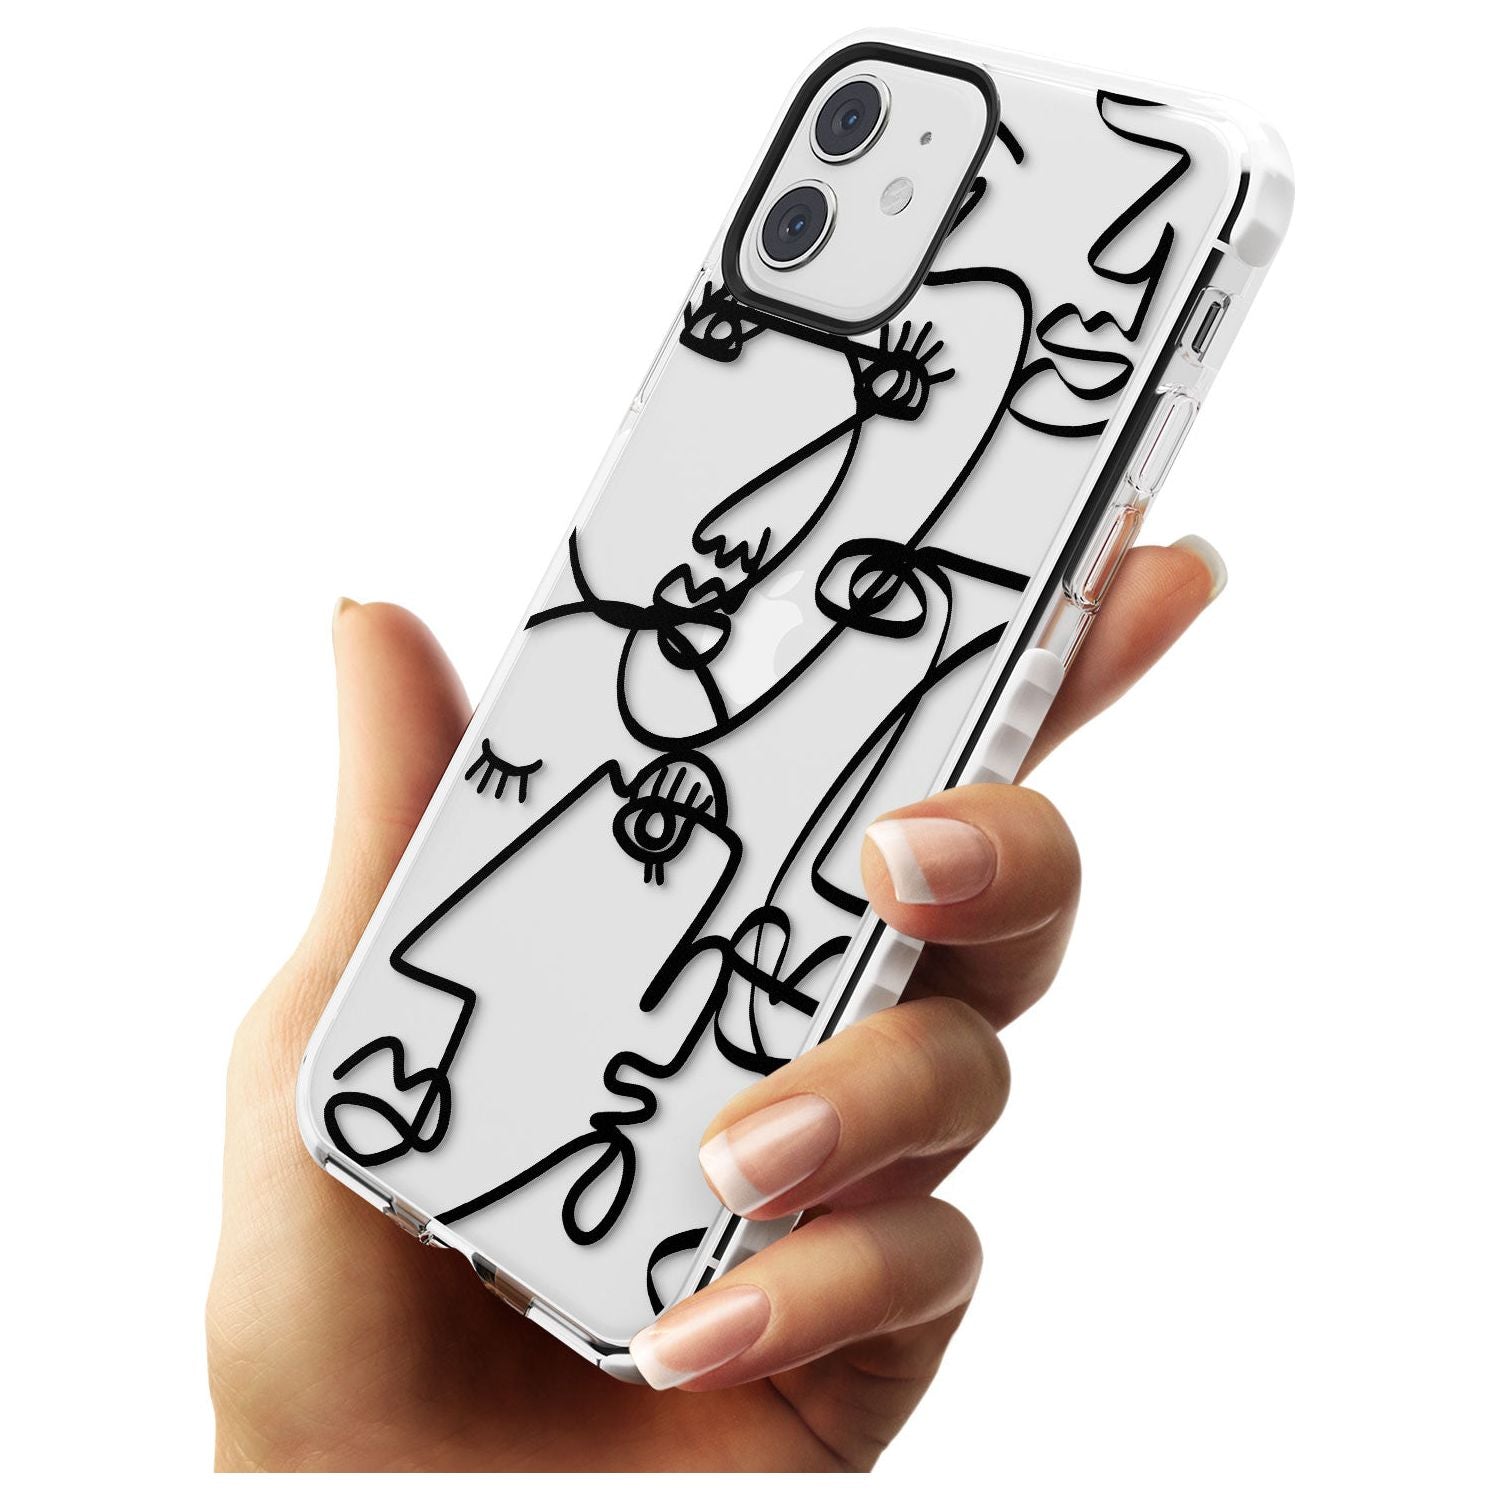 Continuous Line Faces: Black on Clear Slim TPU Phone Case for iPhone 11